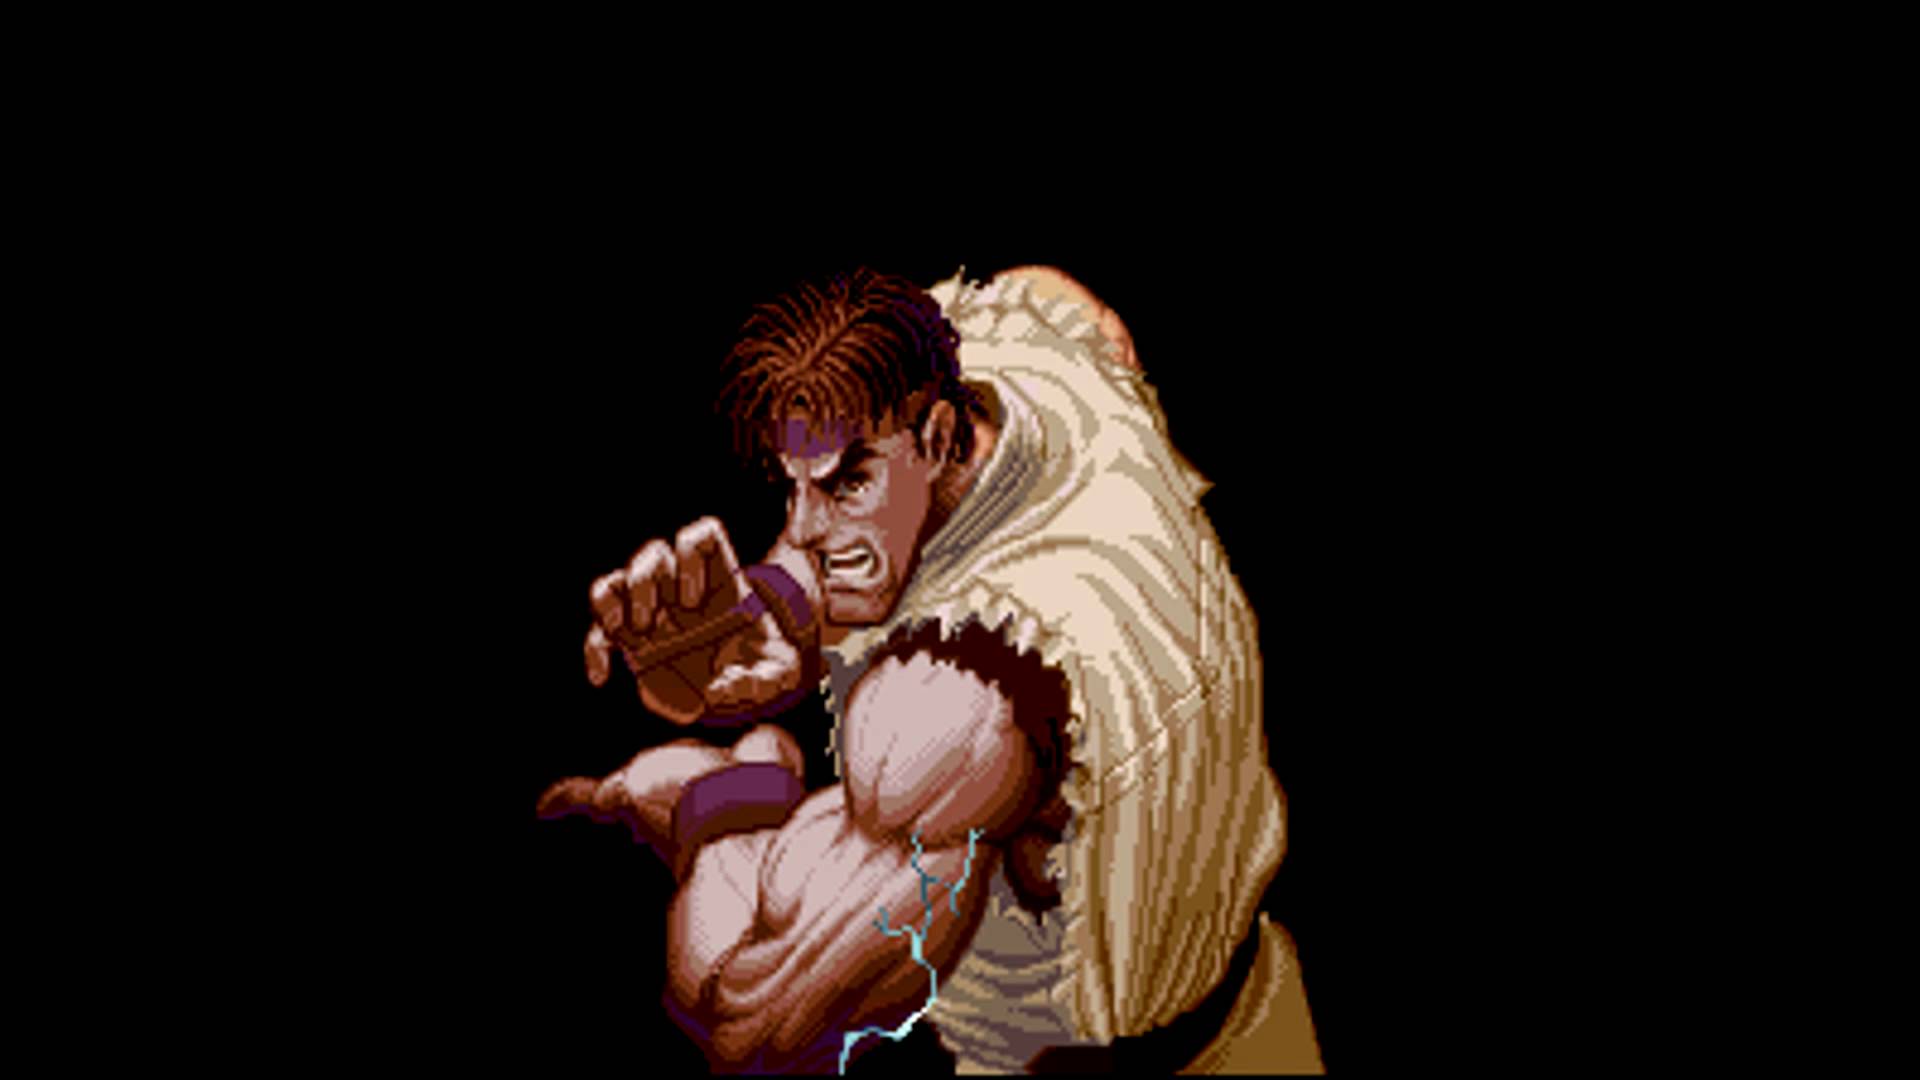 Super Street Fighter 2 Theme HD quality, SNES version